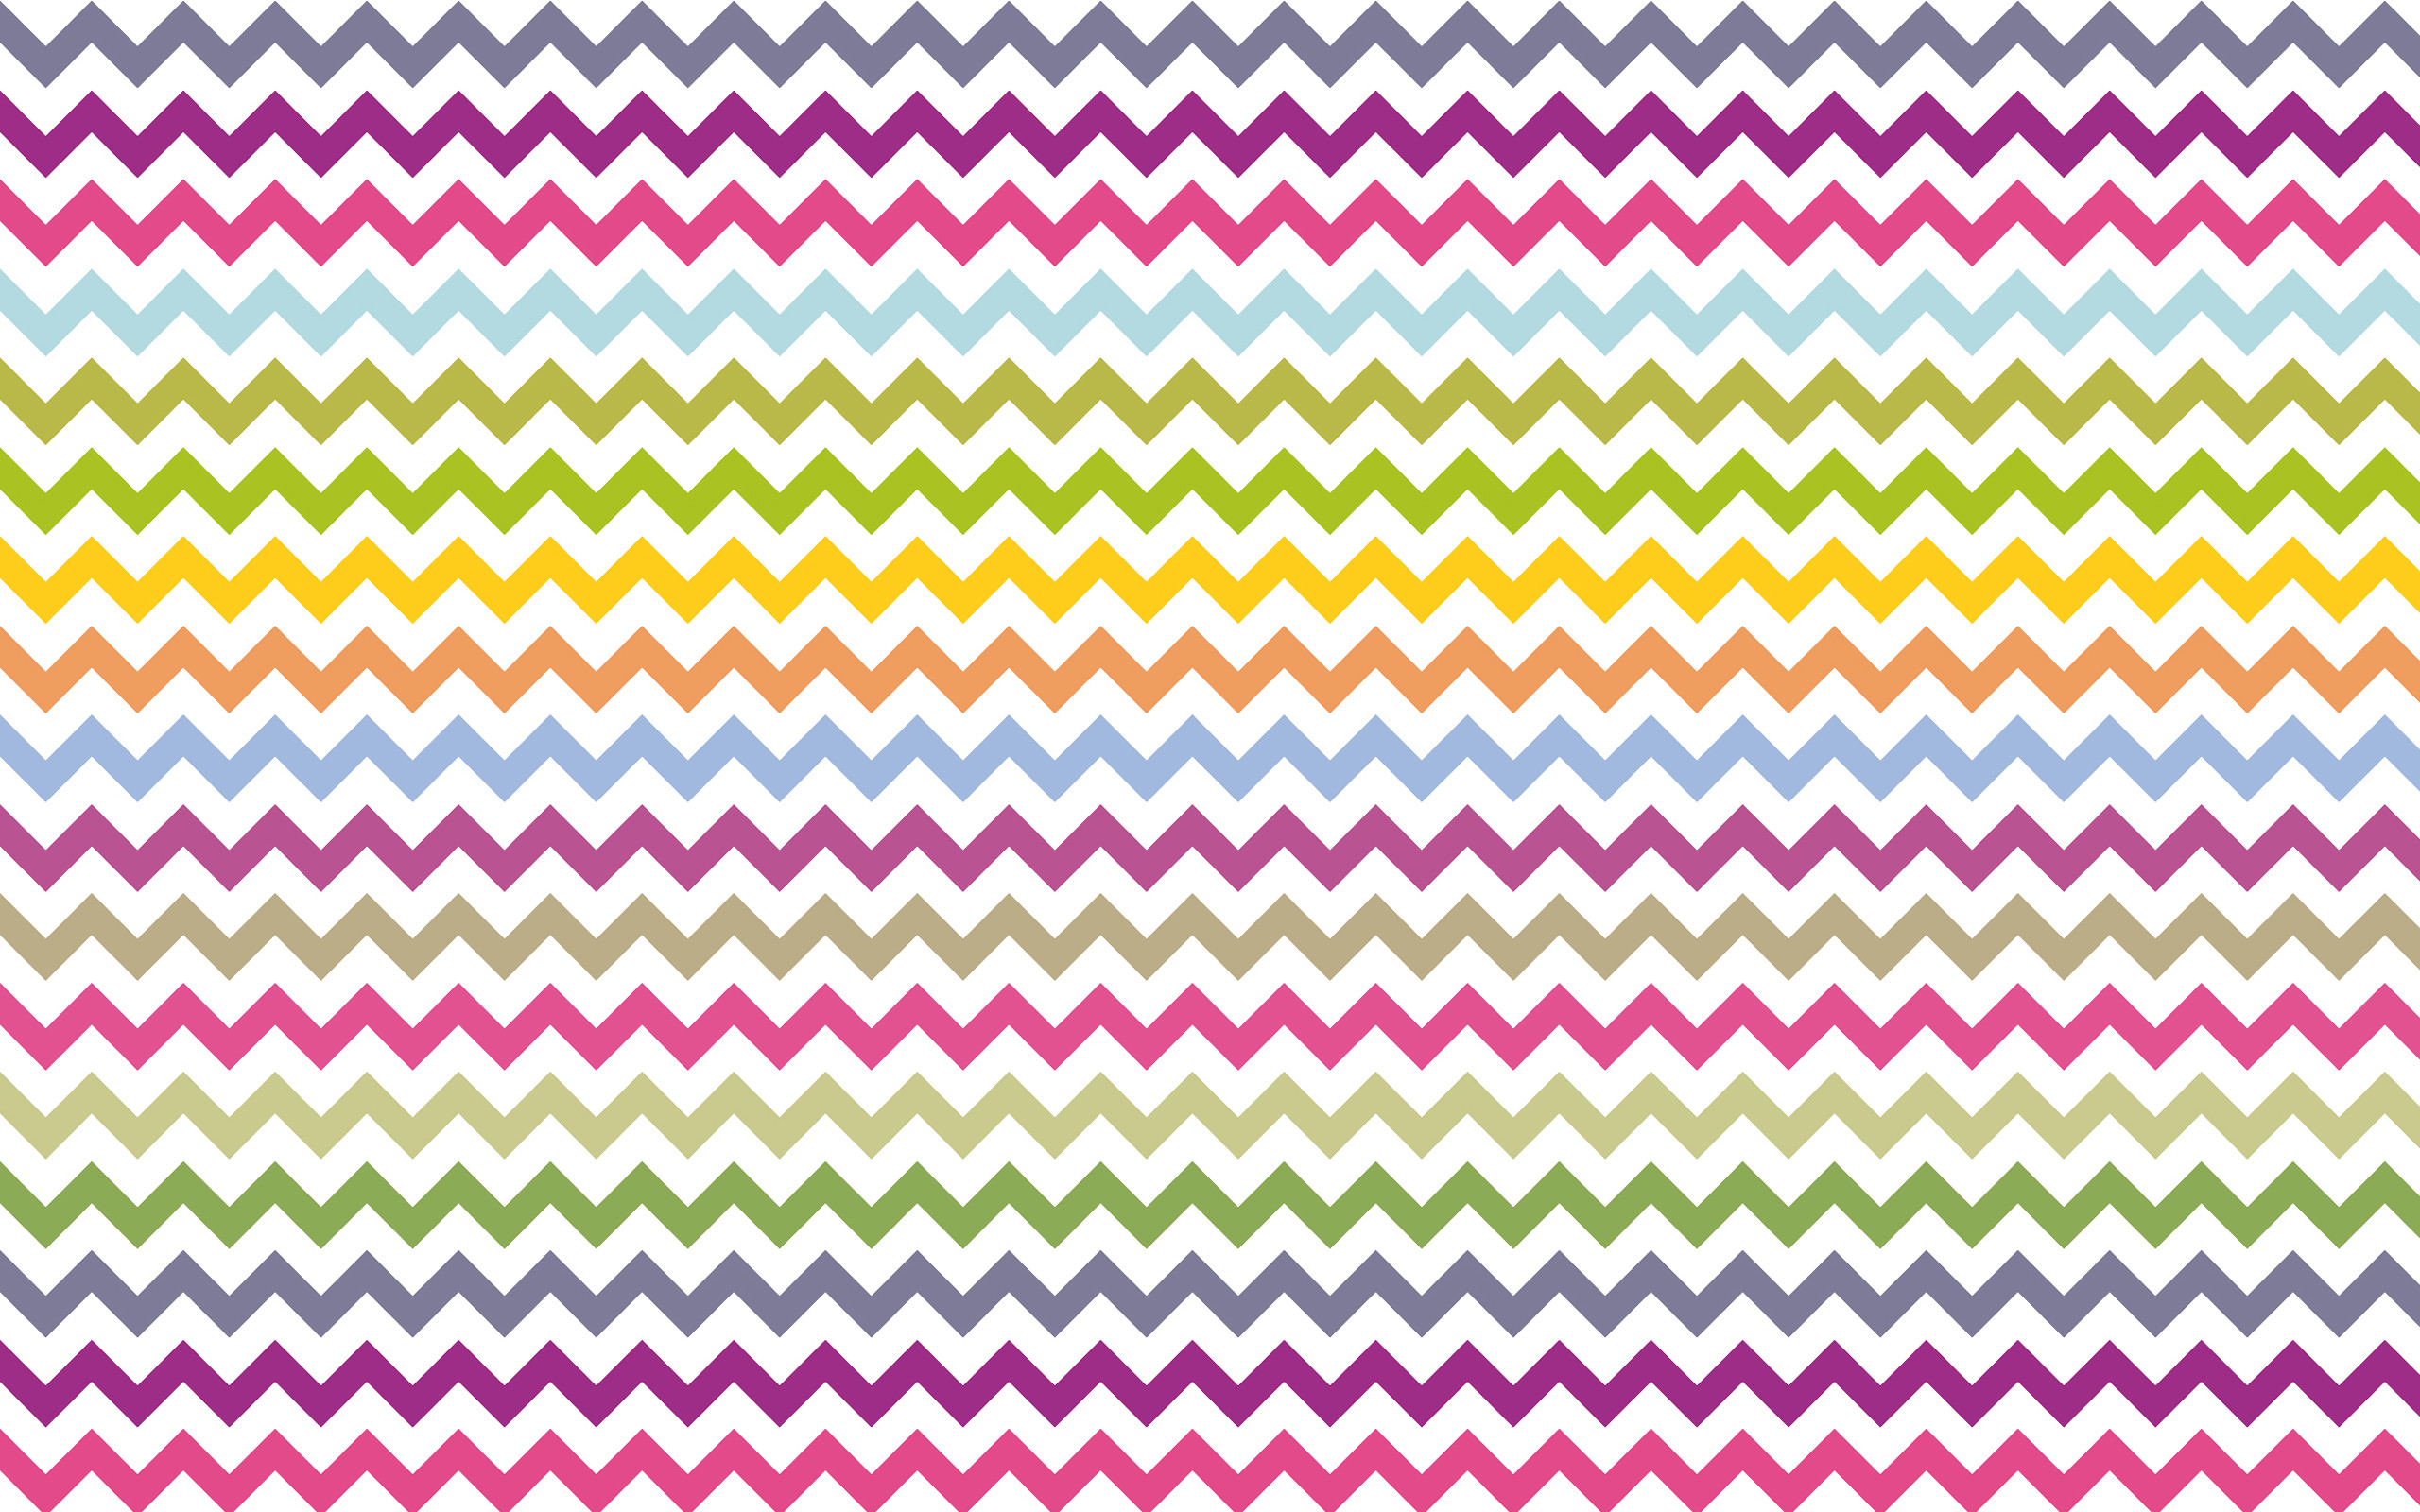 Chevron Wallpaper For Iphone Or Android - Cute Pattern Backgrounds Hd - HD Wallpaper 